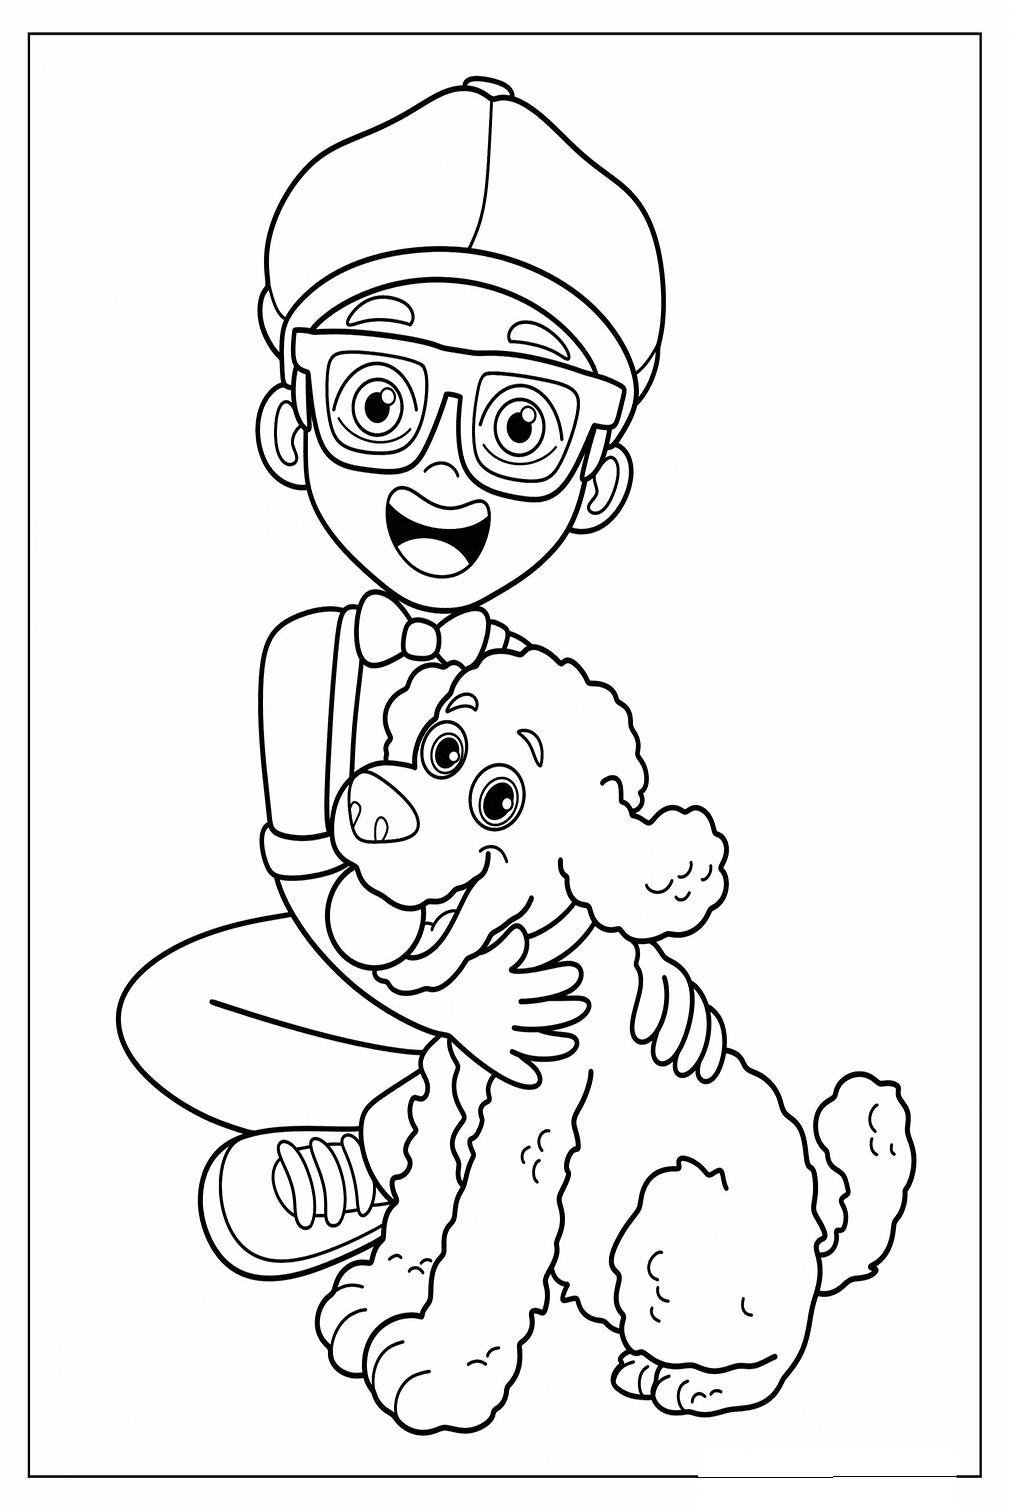 Young Blippi Coloring Page from Blippi